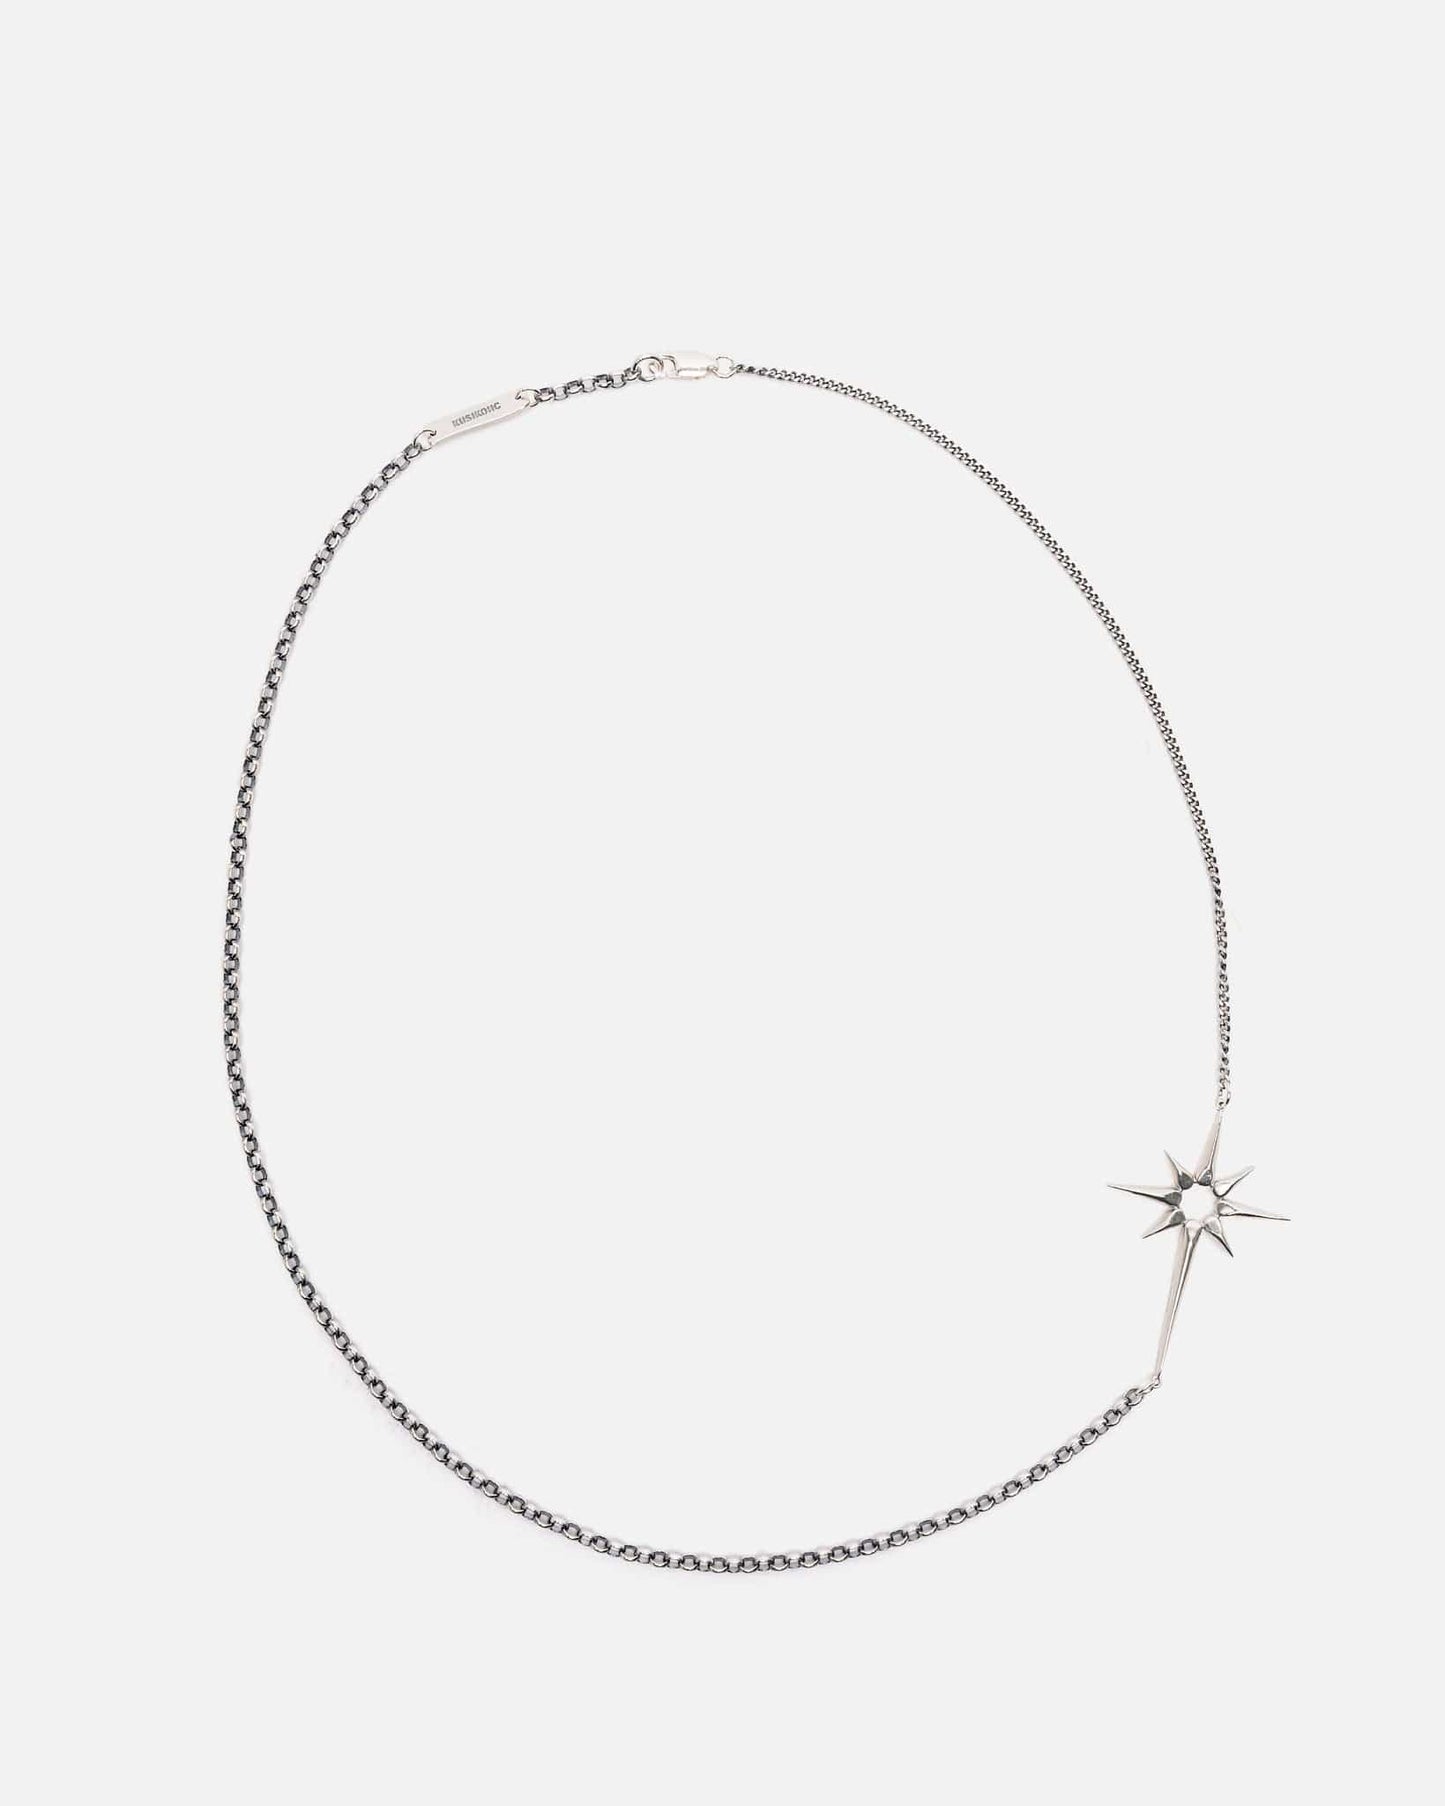 Kusikohc Jewelry Thorn Necklace in Silver